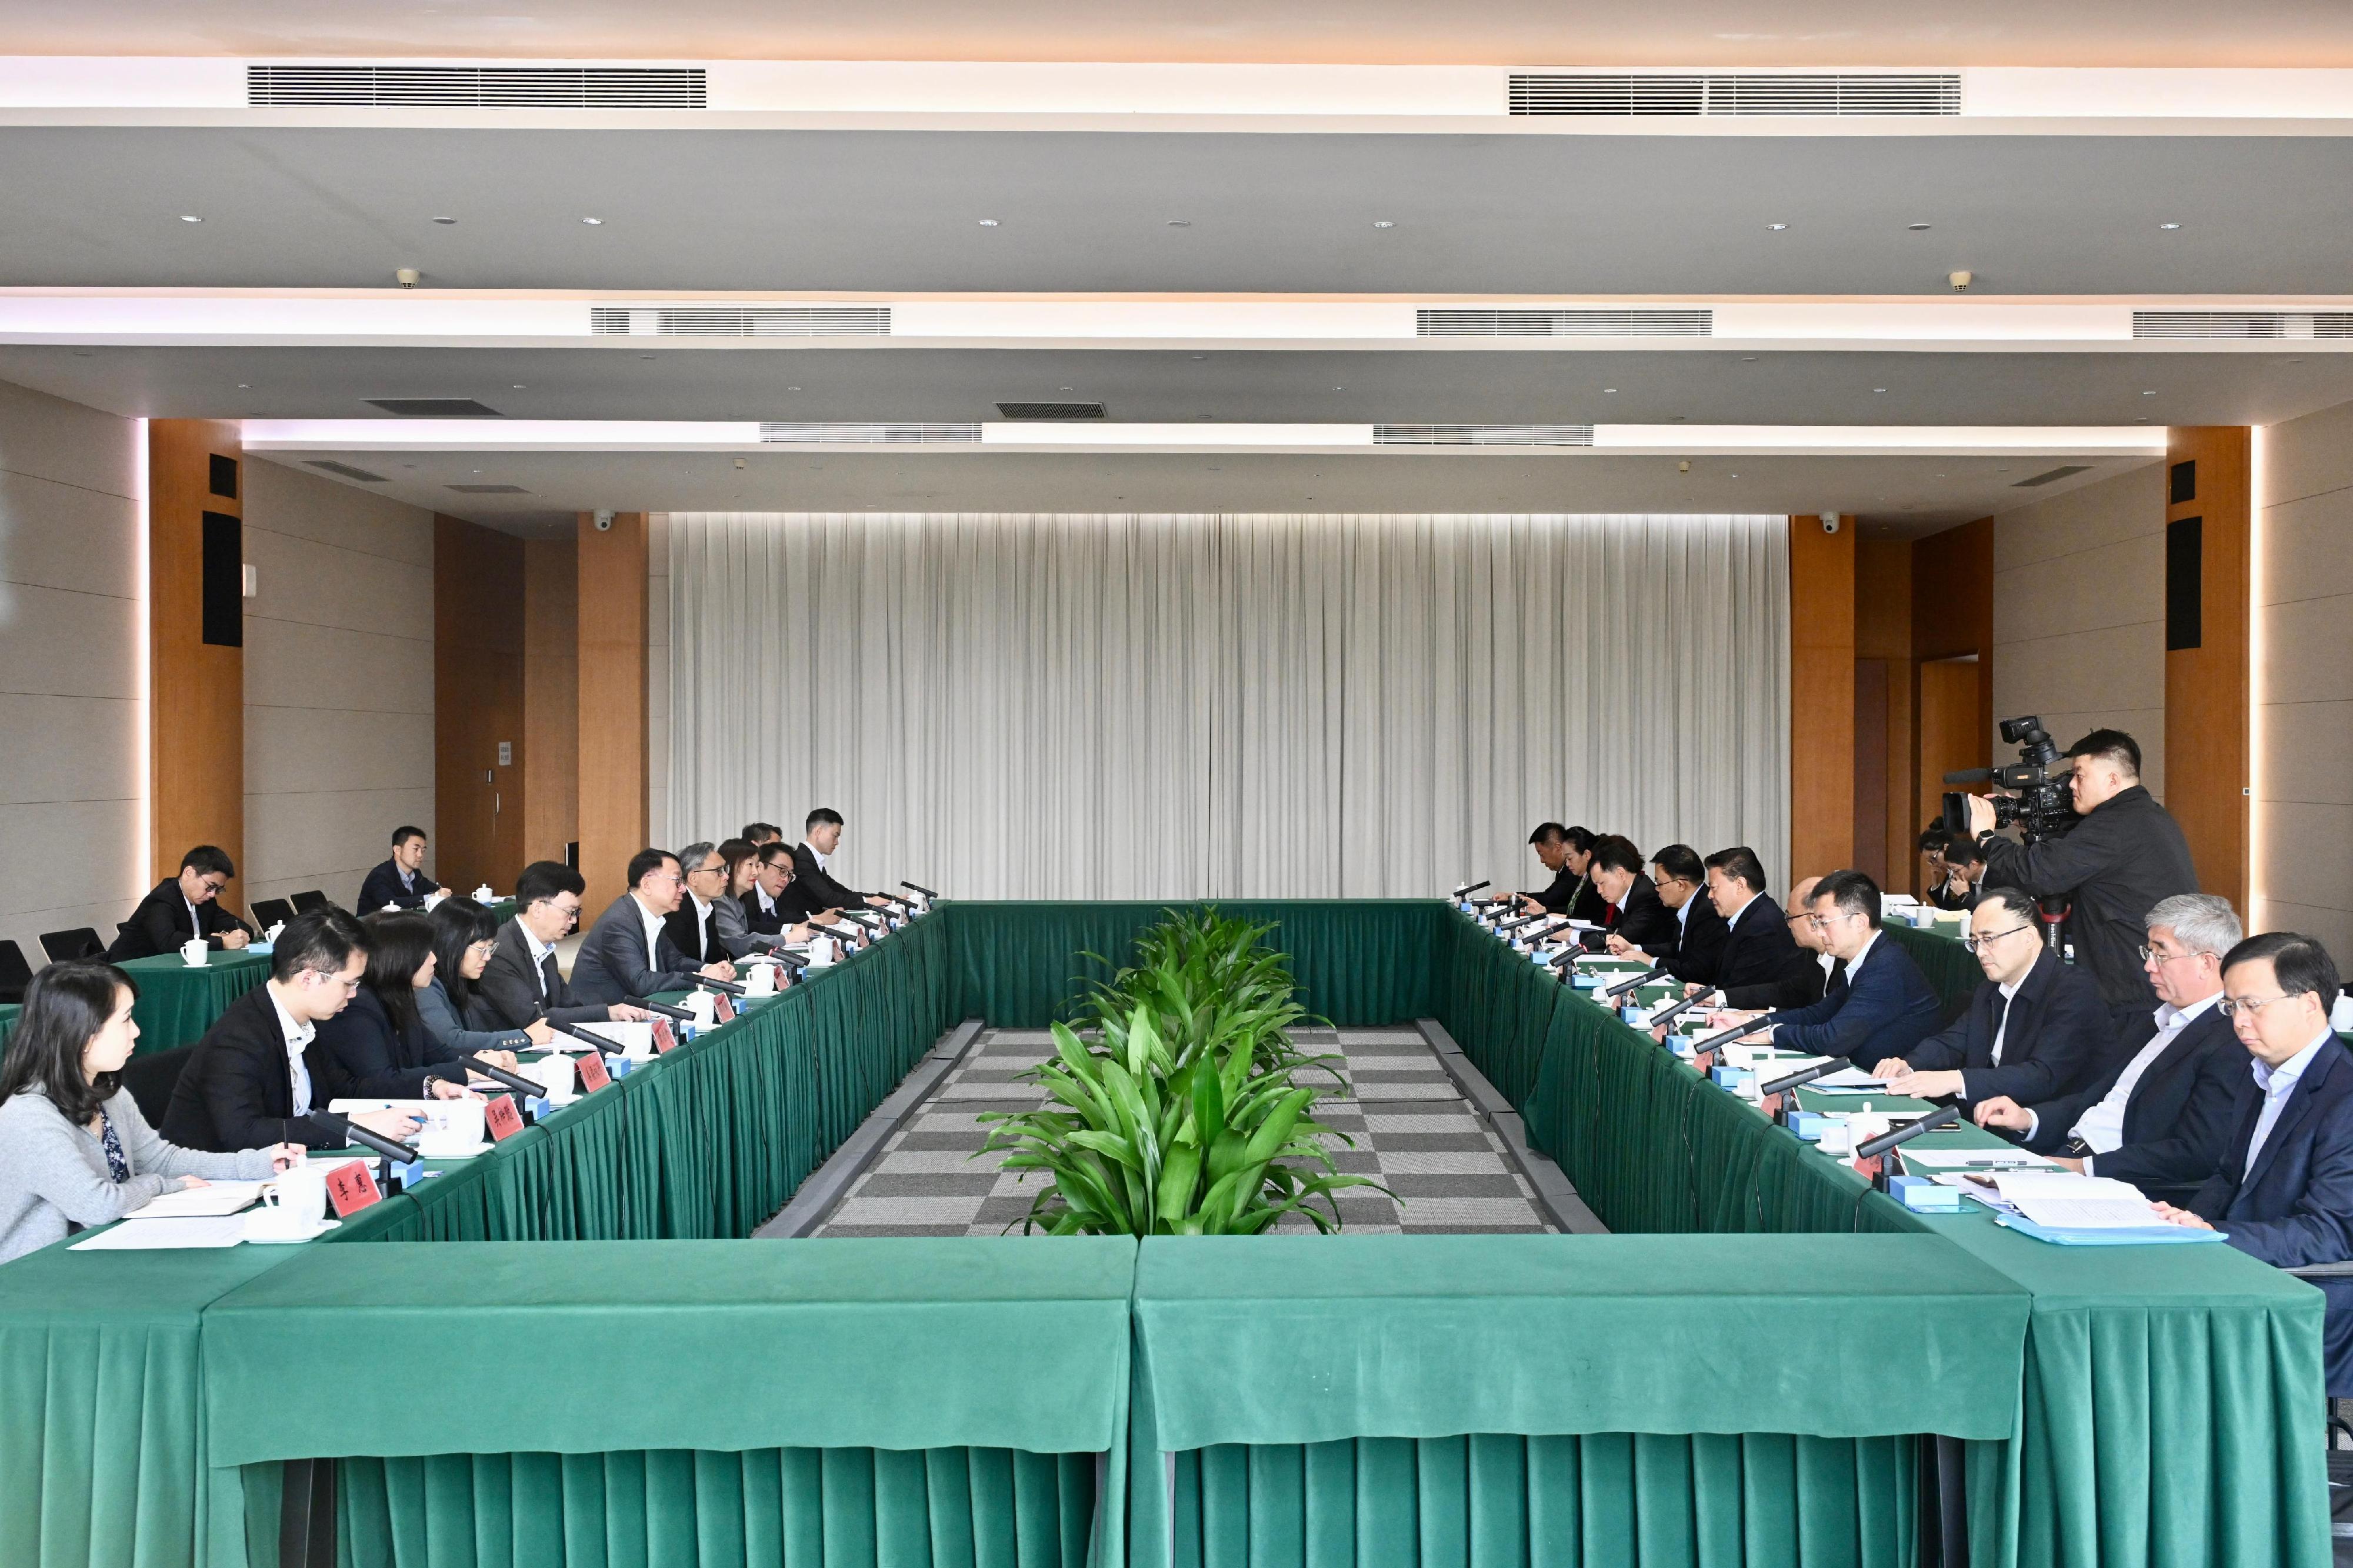 The Chief Secretary for Administration, Mr Chan Kwok-ki, today (January 10) visited Shenzhen and concluded his visit to Mainland cities of the Guangdong-Hong Kong-Macao Greater Bay Area. Photo shows Mr Chan (sixth left) meeting with the Secretary of the CPC Shenzhen Municipal Committee, Mr Meng Fanli (sixth right). The Under Secretary for Transport and Logistics, Mr Liu Chun-san (fifth left), and the Under Secretary for Security, Mr Michael Cheuk (seventh left), also attended the meeting.